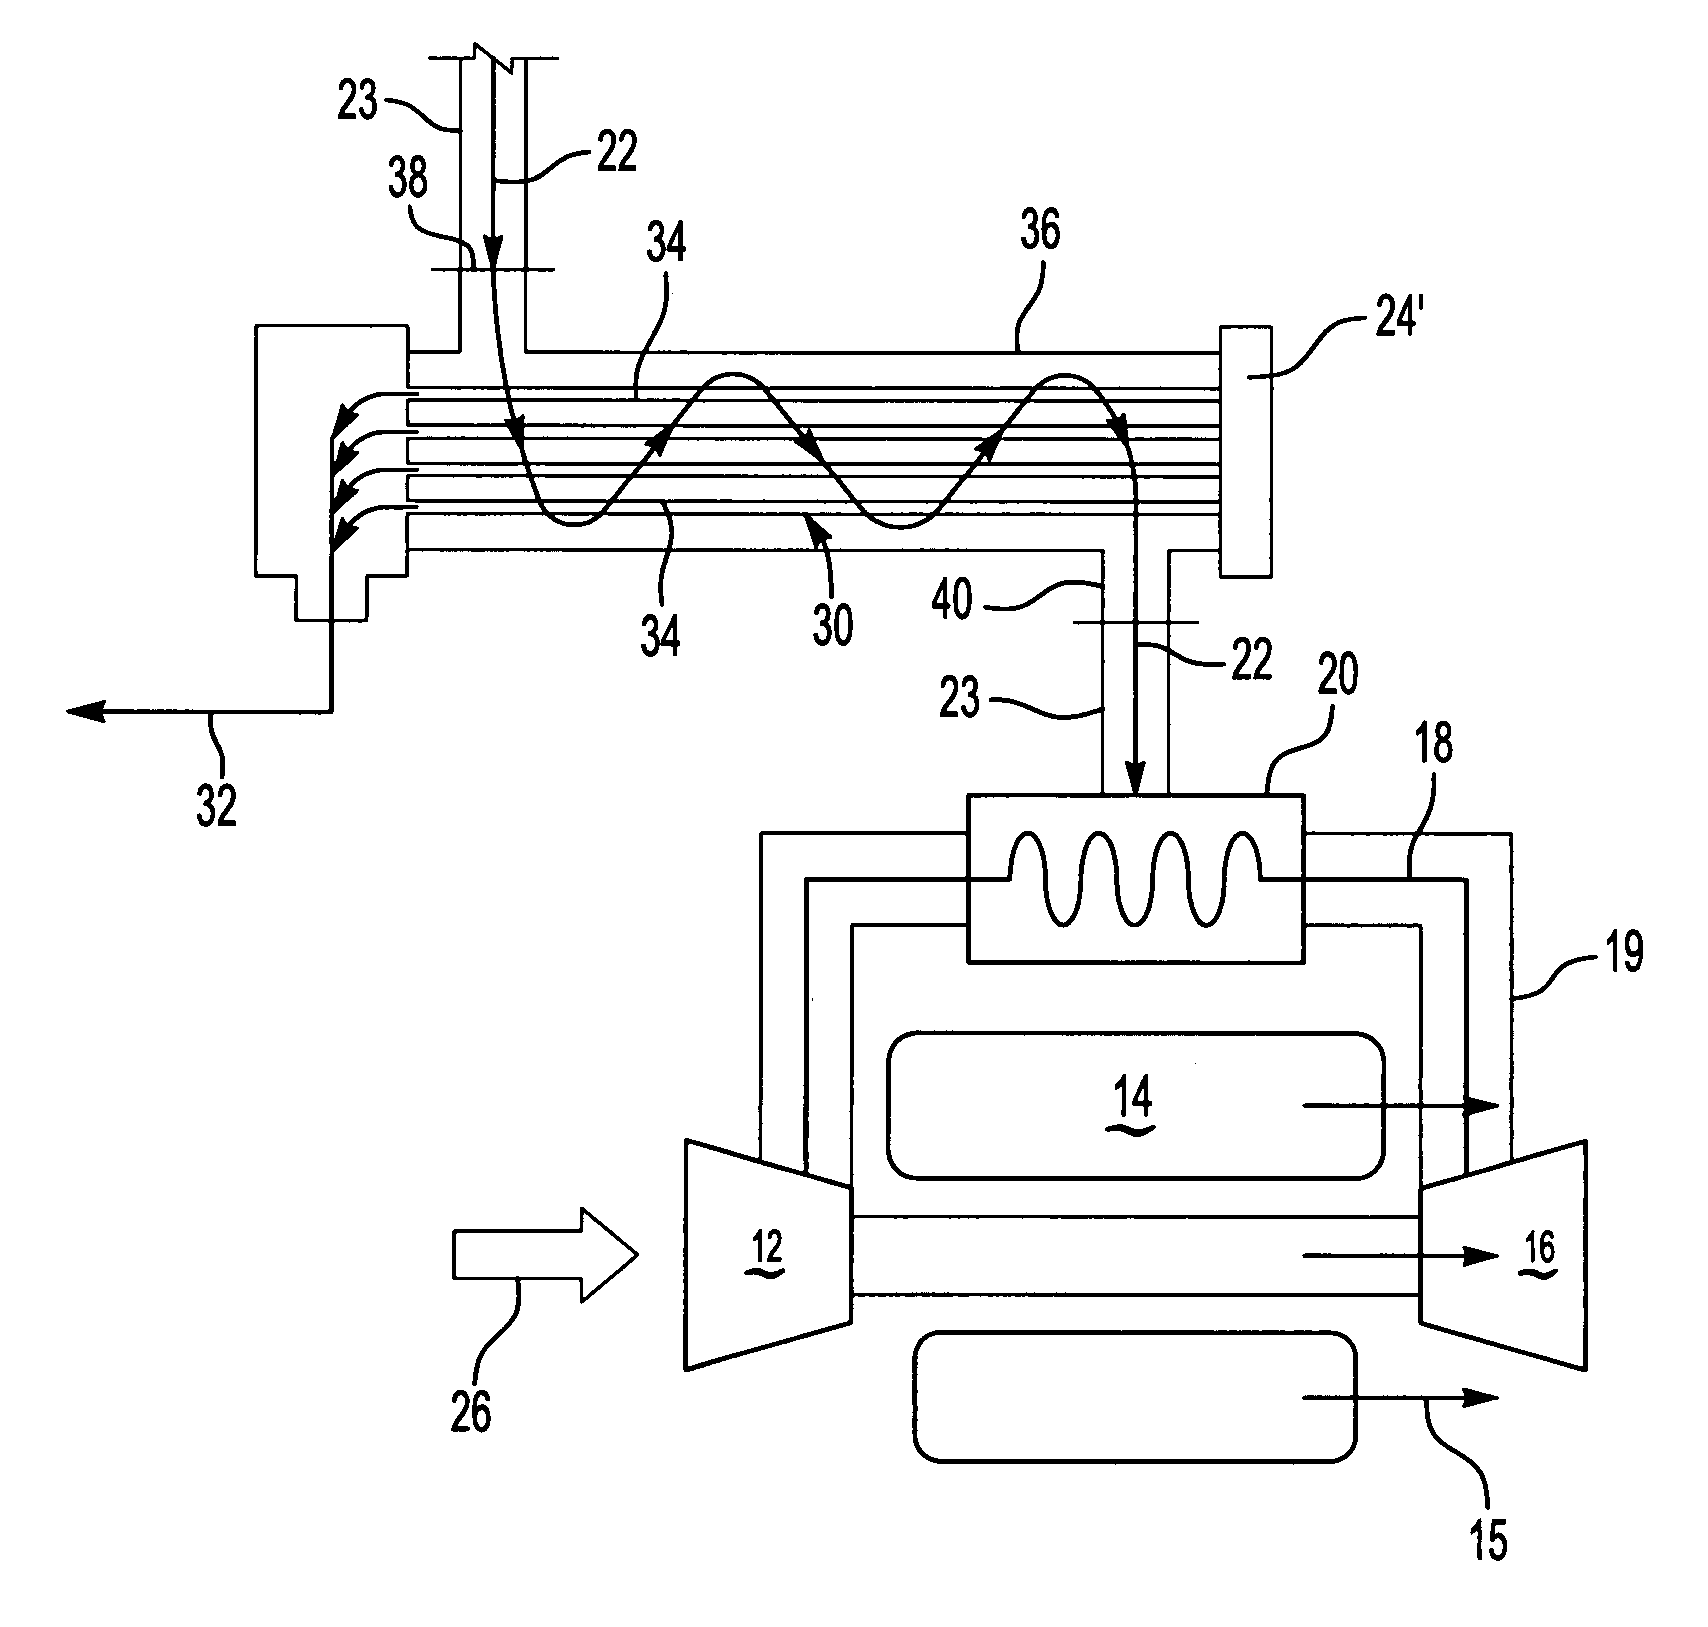 Gas turbine cooling system